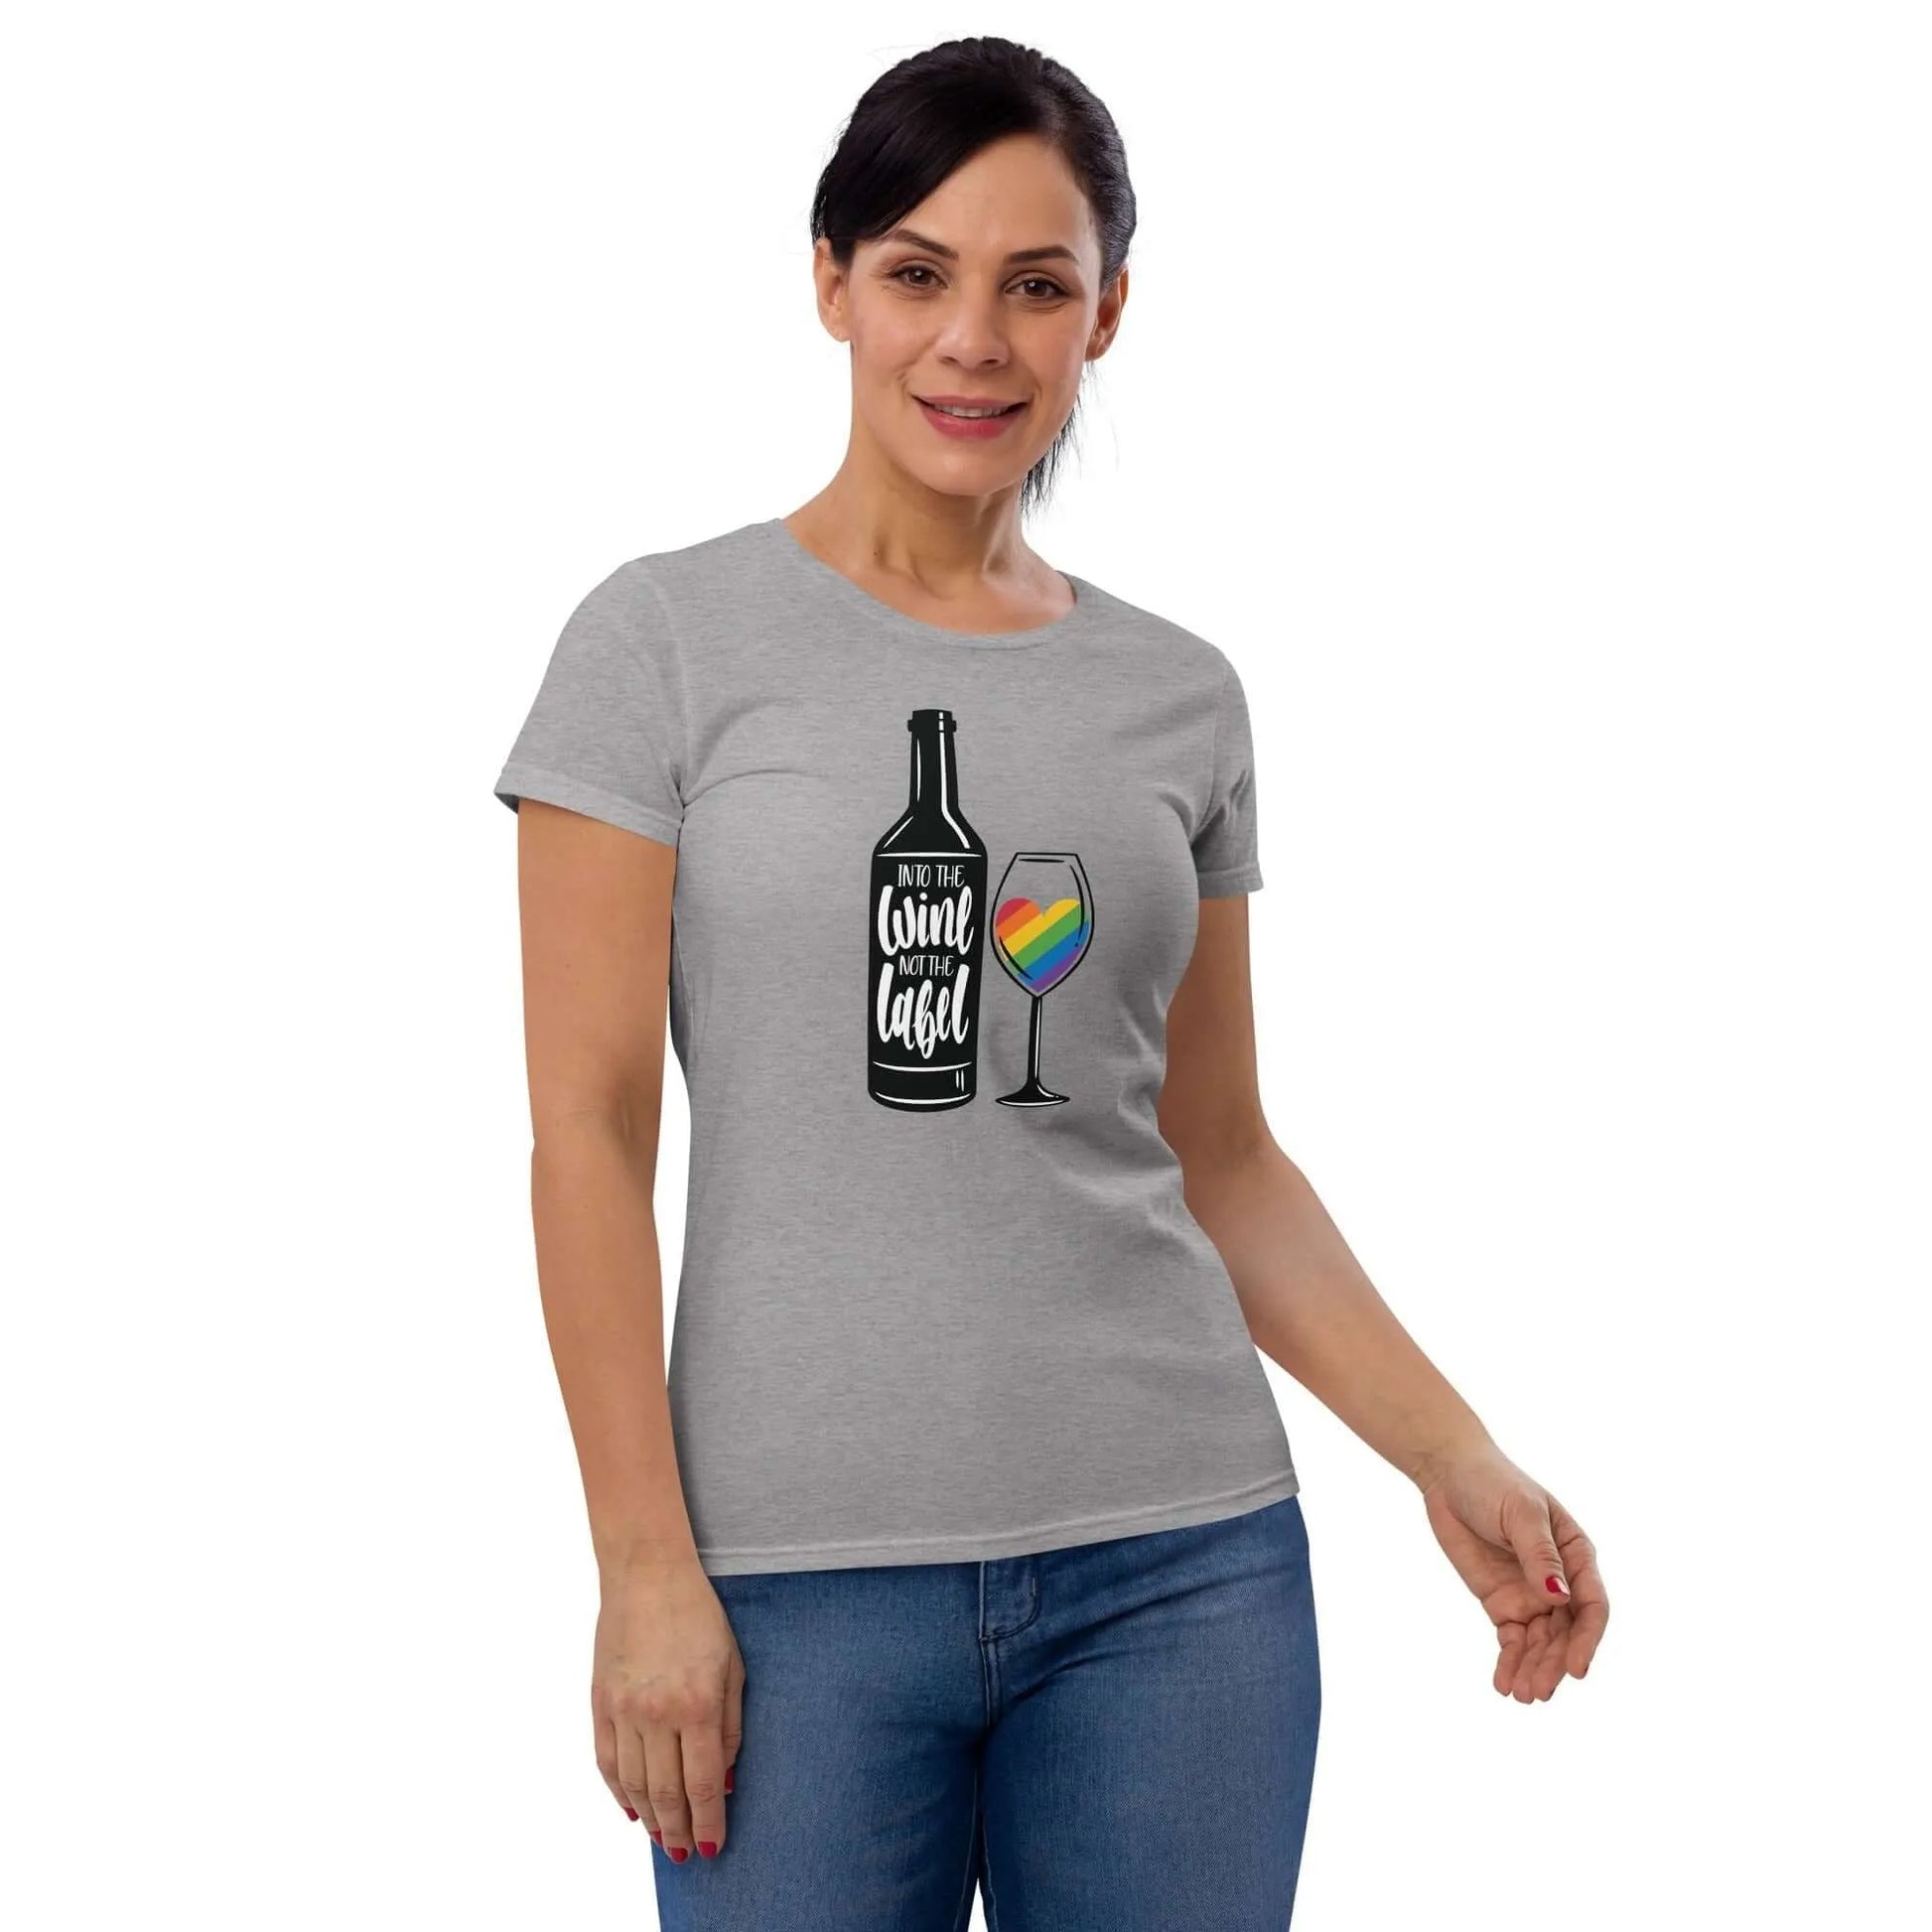 Into The Wine Not The Label Women’s T-Shirt